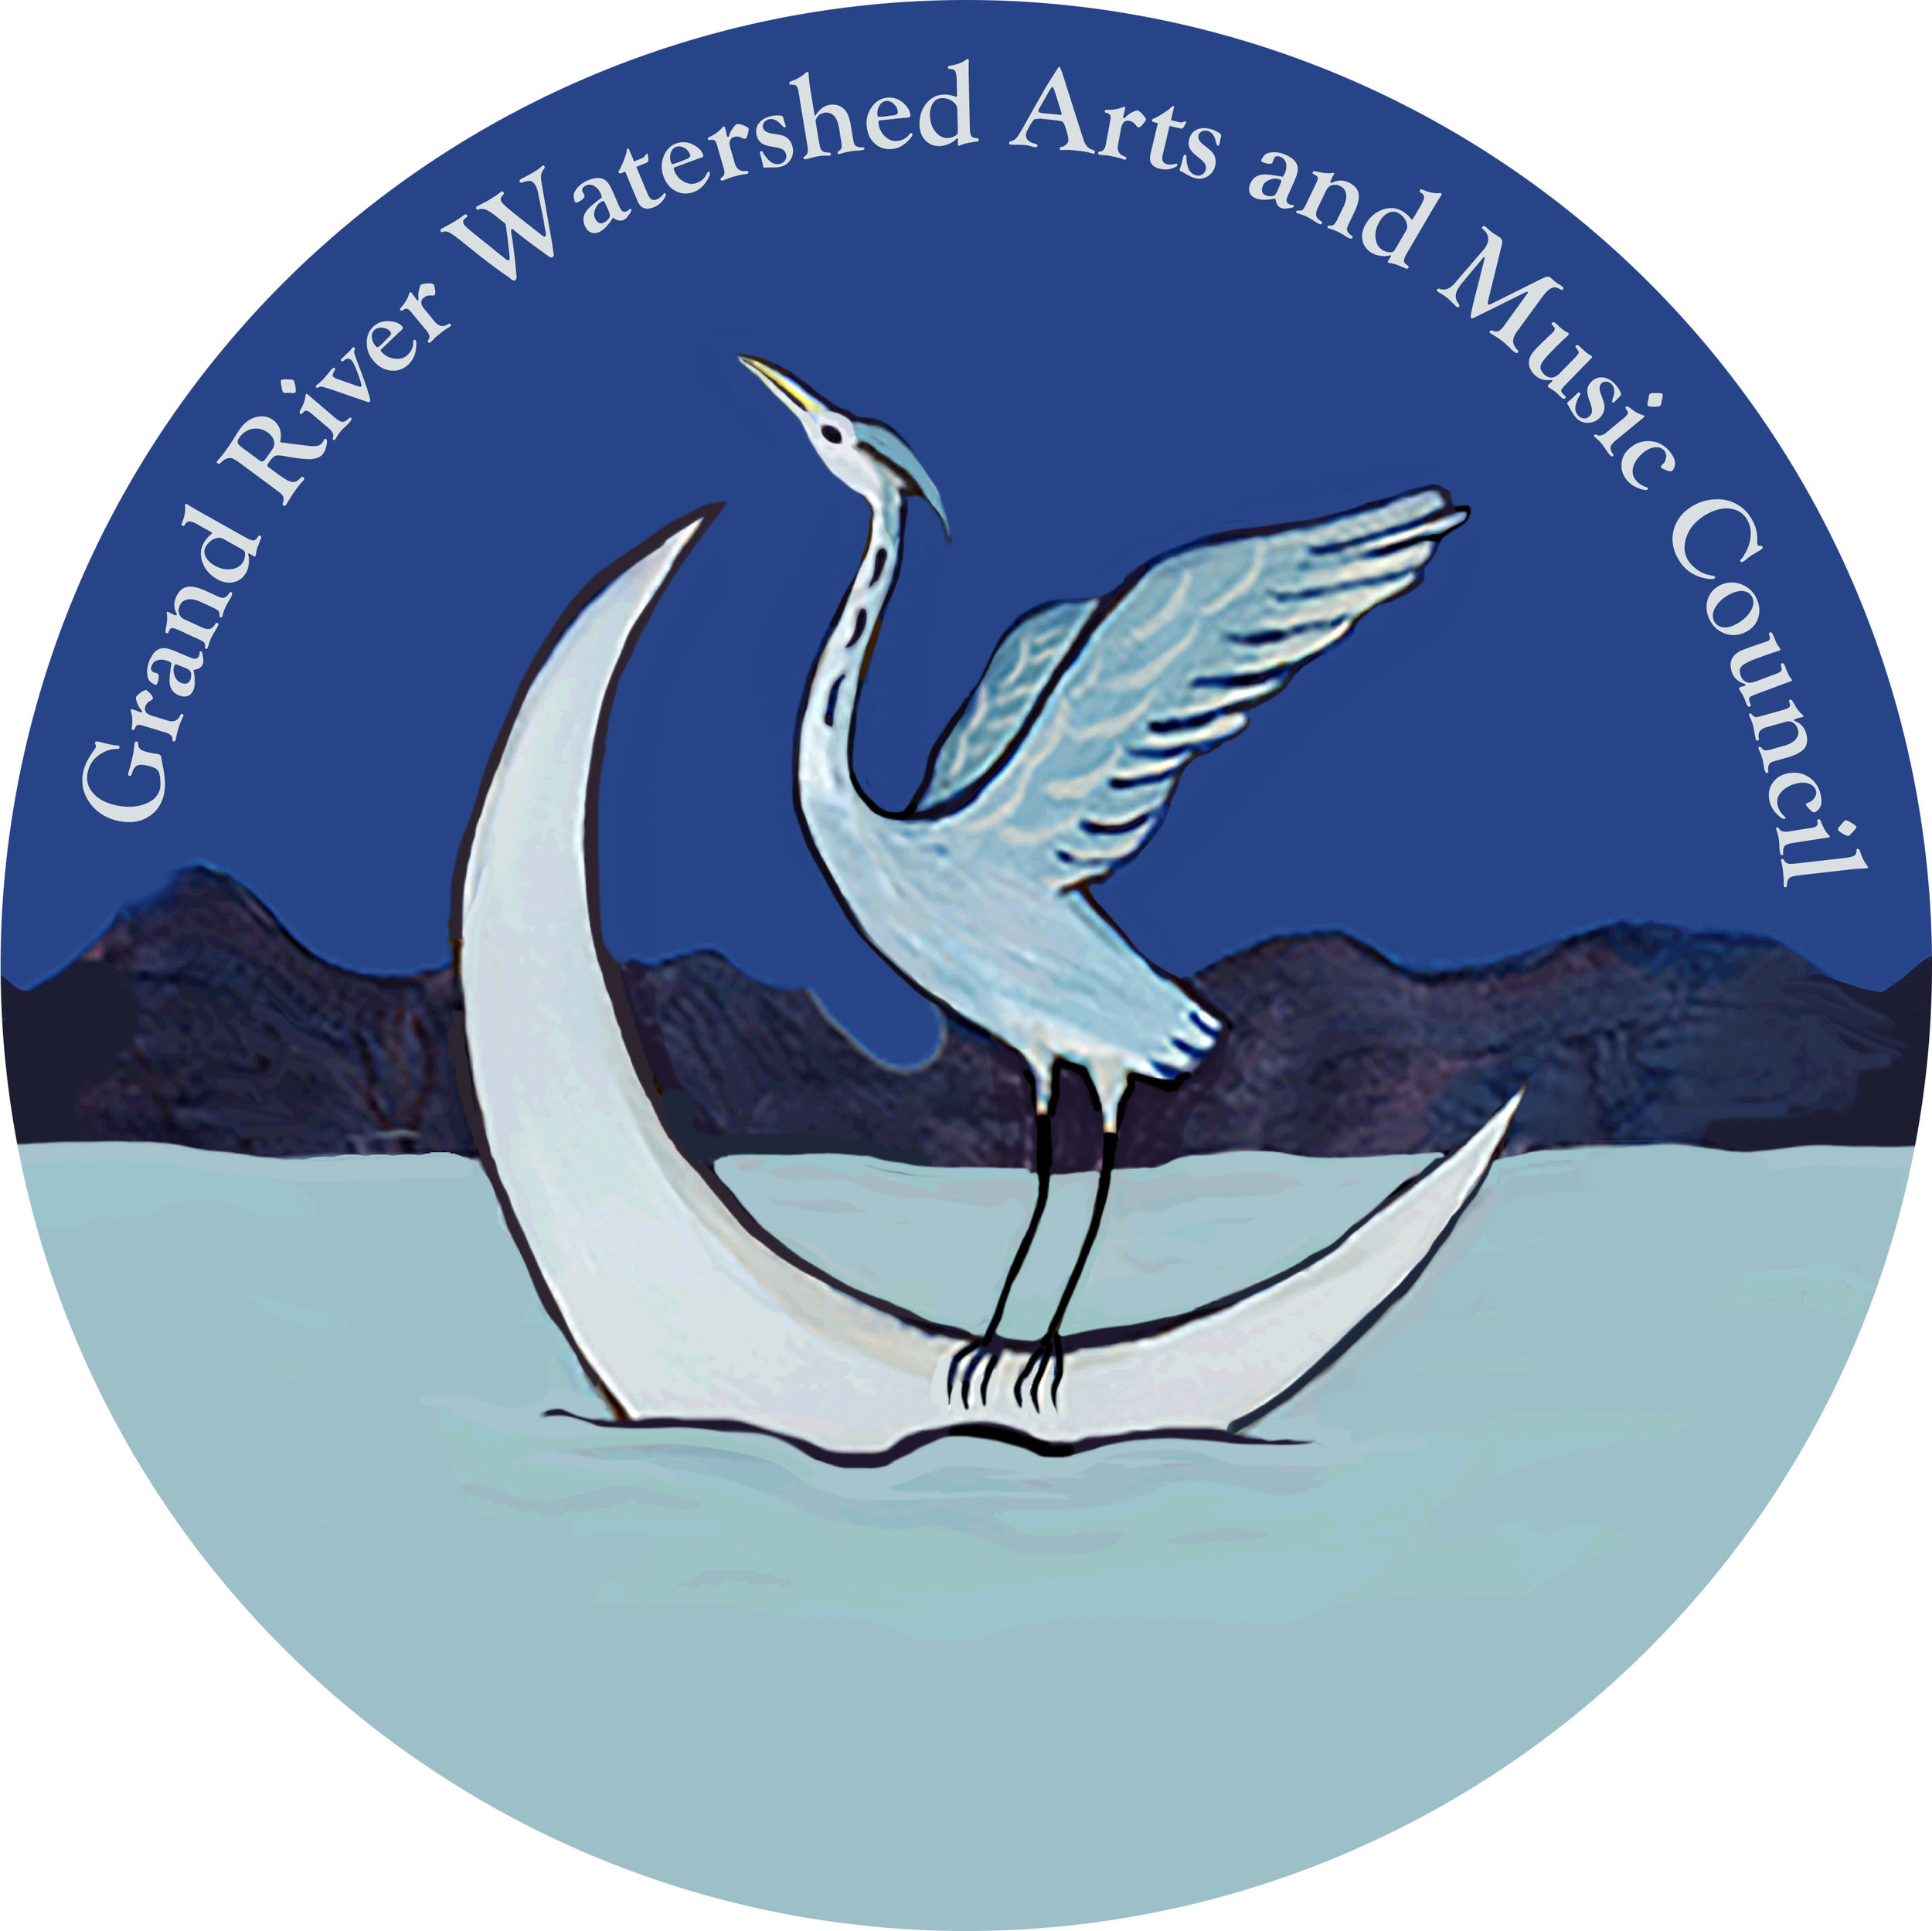 Grand River Watershed Arts and Music Council (GRWAMC)